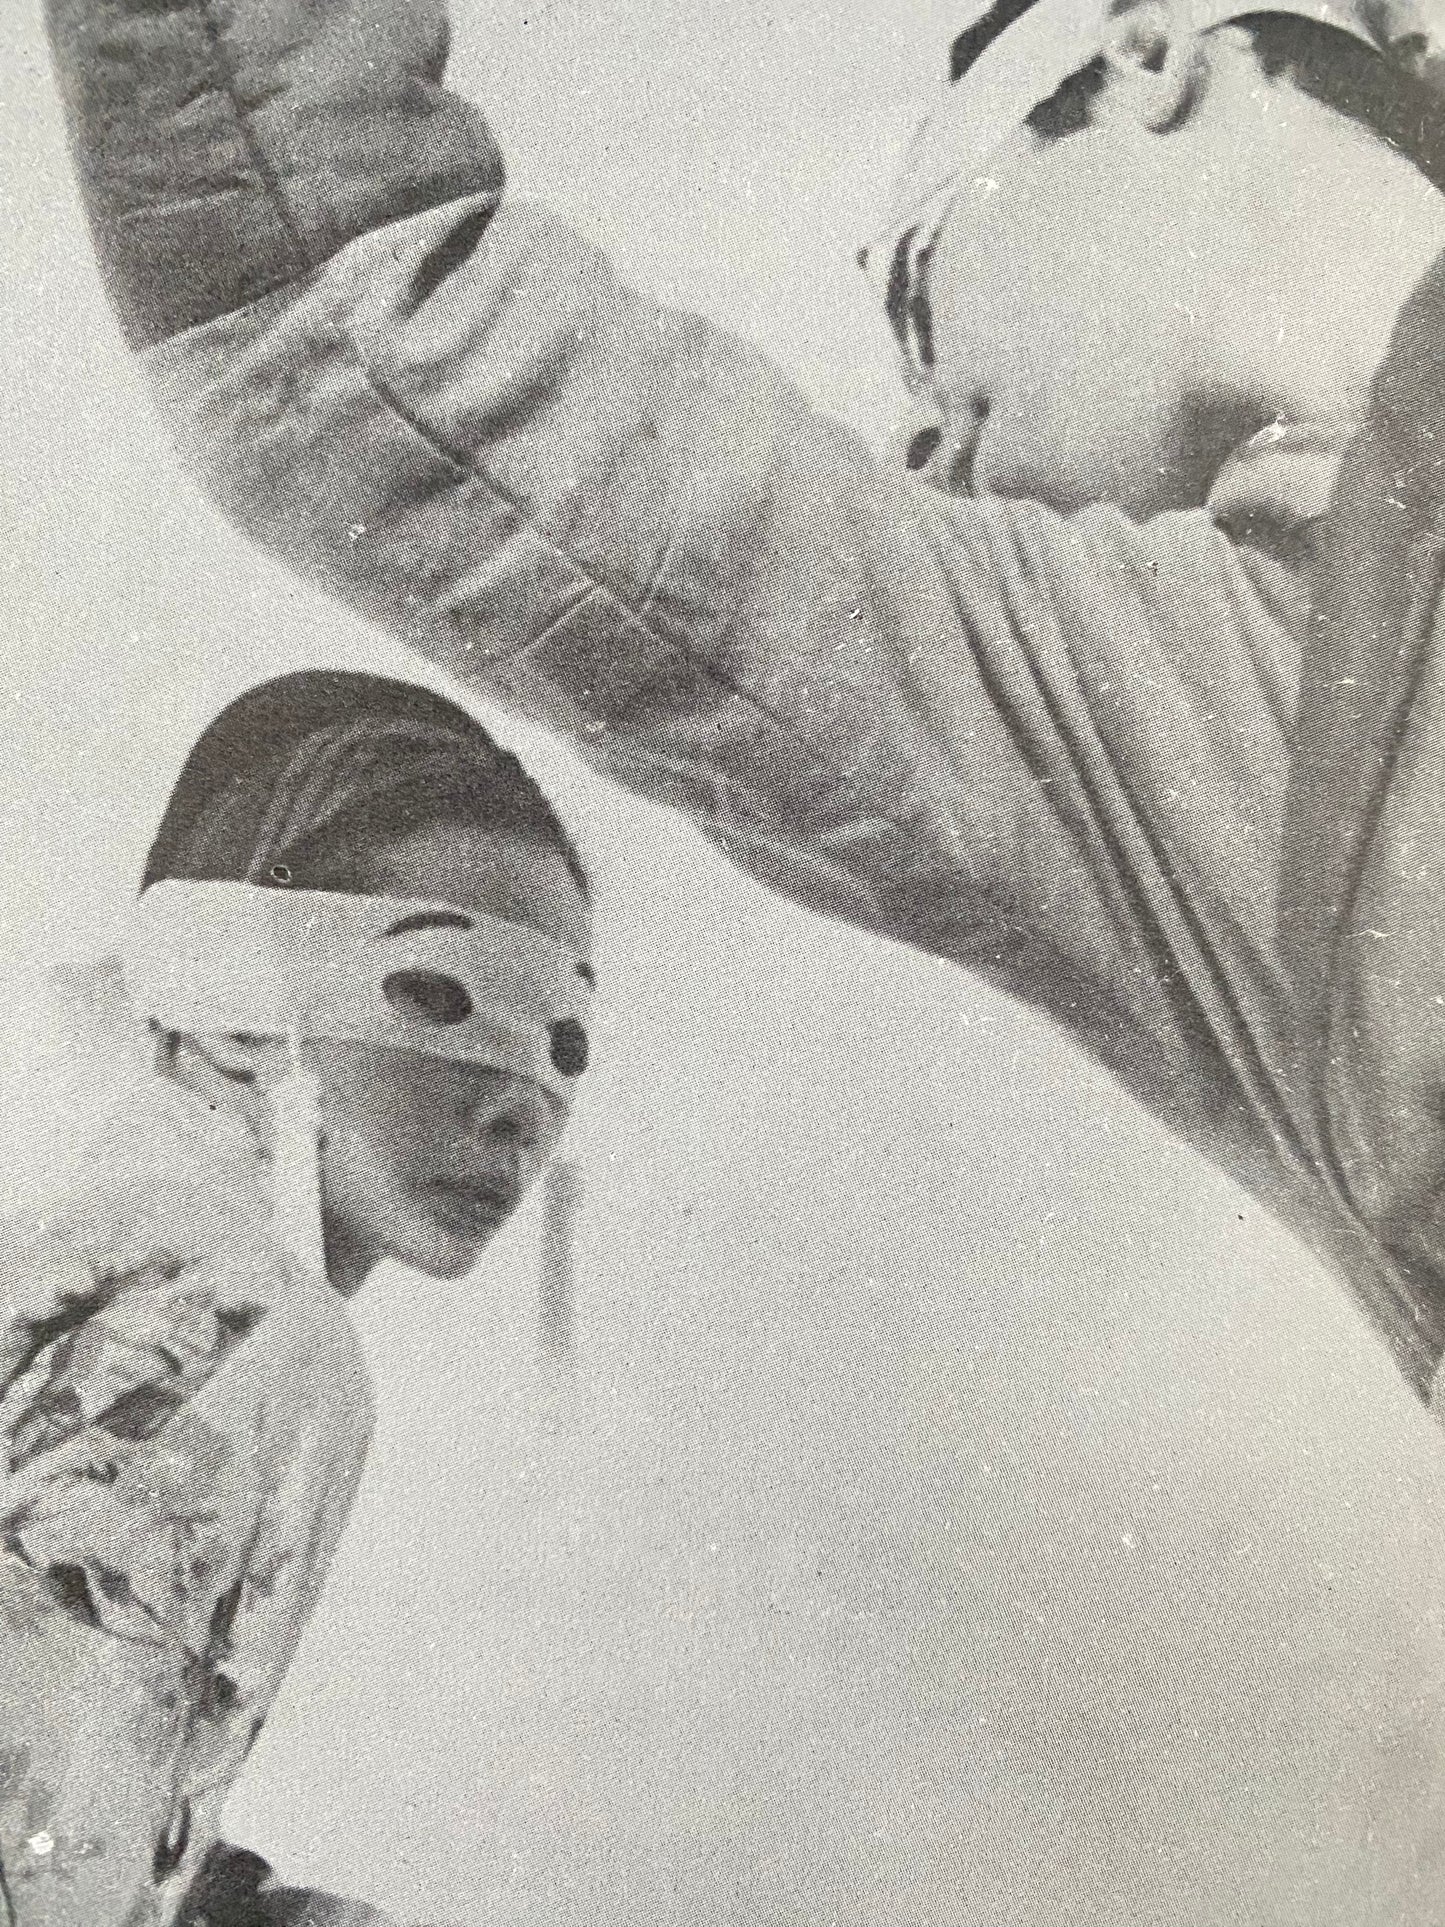 Shindai: The Art Of Japanese Bed Fighting (1965)